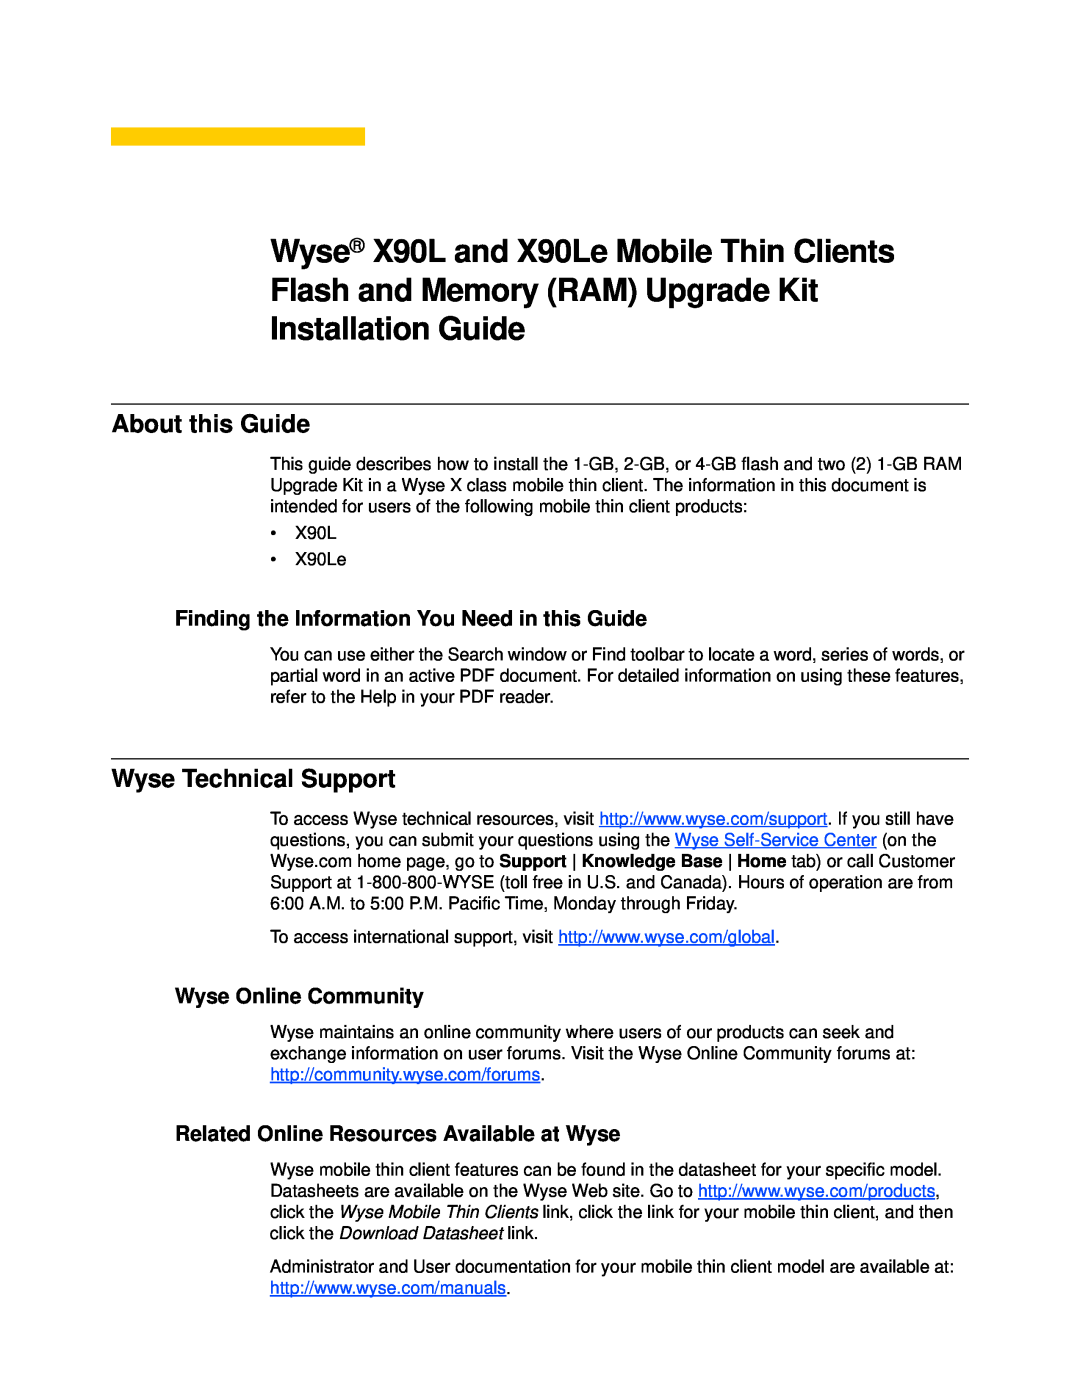 Wyse Technology X90LE manual Wyse X90L and X90Le Mobile Thin Clients, Flash and Memory RAM Upgrade Kit Installation Guide 